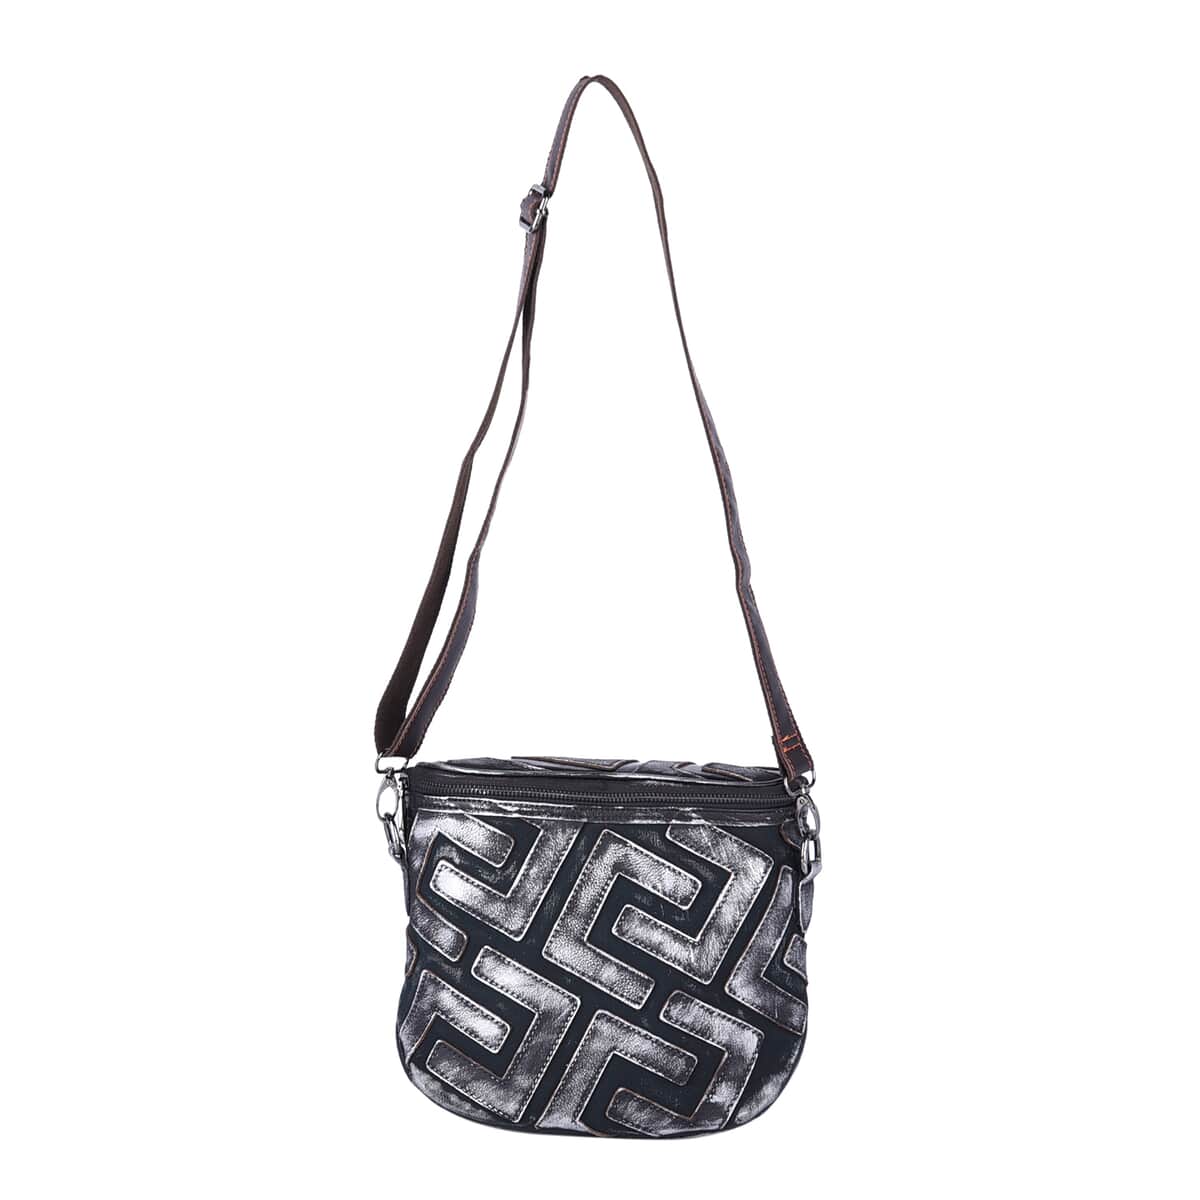 CHAOS BY ELSIE Silver and Black Color Fret Pattern Genuine Leather Crossbody Tote Bag with Shoulder Strap image number 0